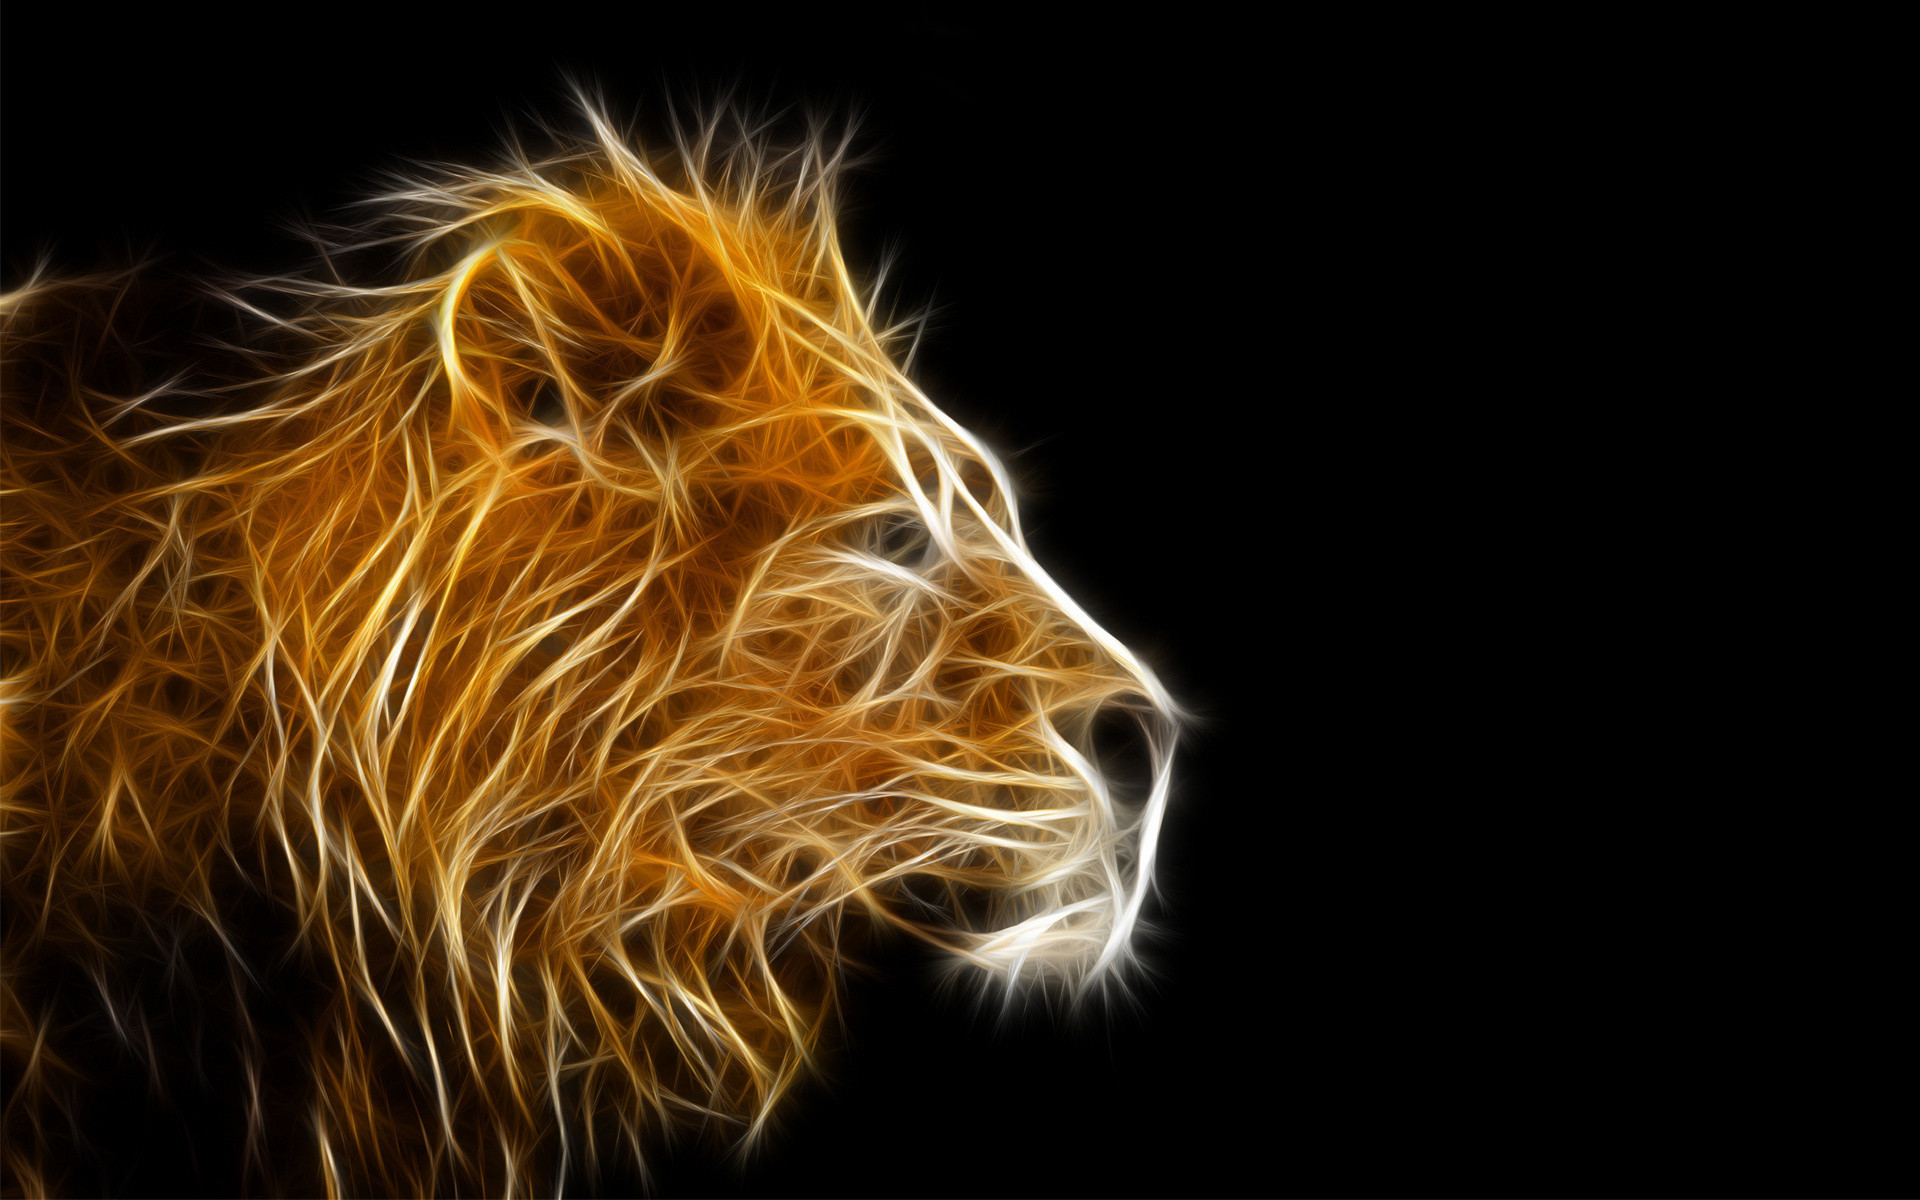 Animal Wallpaper Lion Wallpaper Black And White Wallpaper Mobile with High Resolution